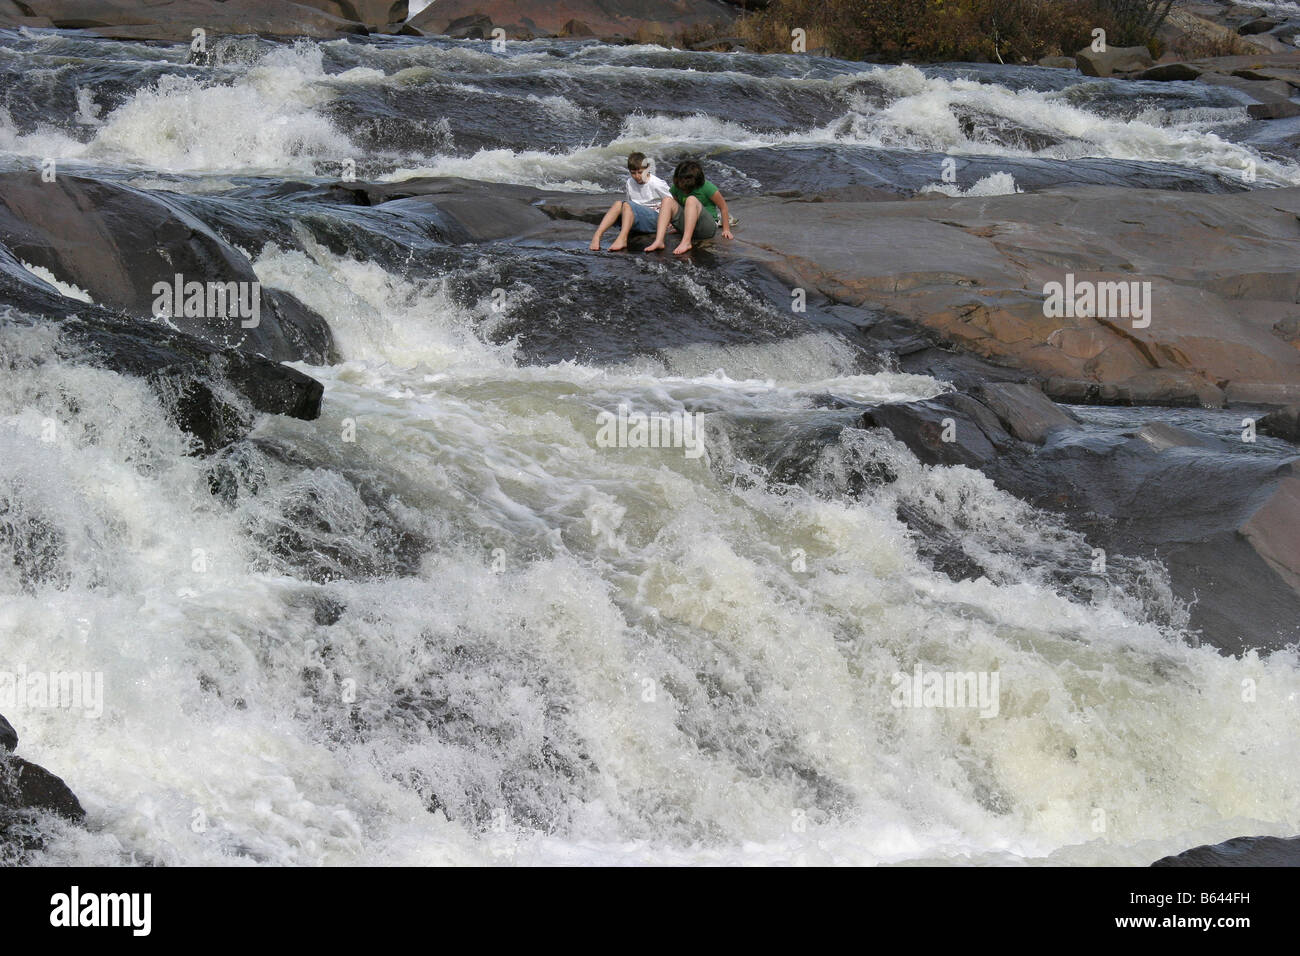 children relaxing on rocks by raging river rapids Stock Photo